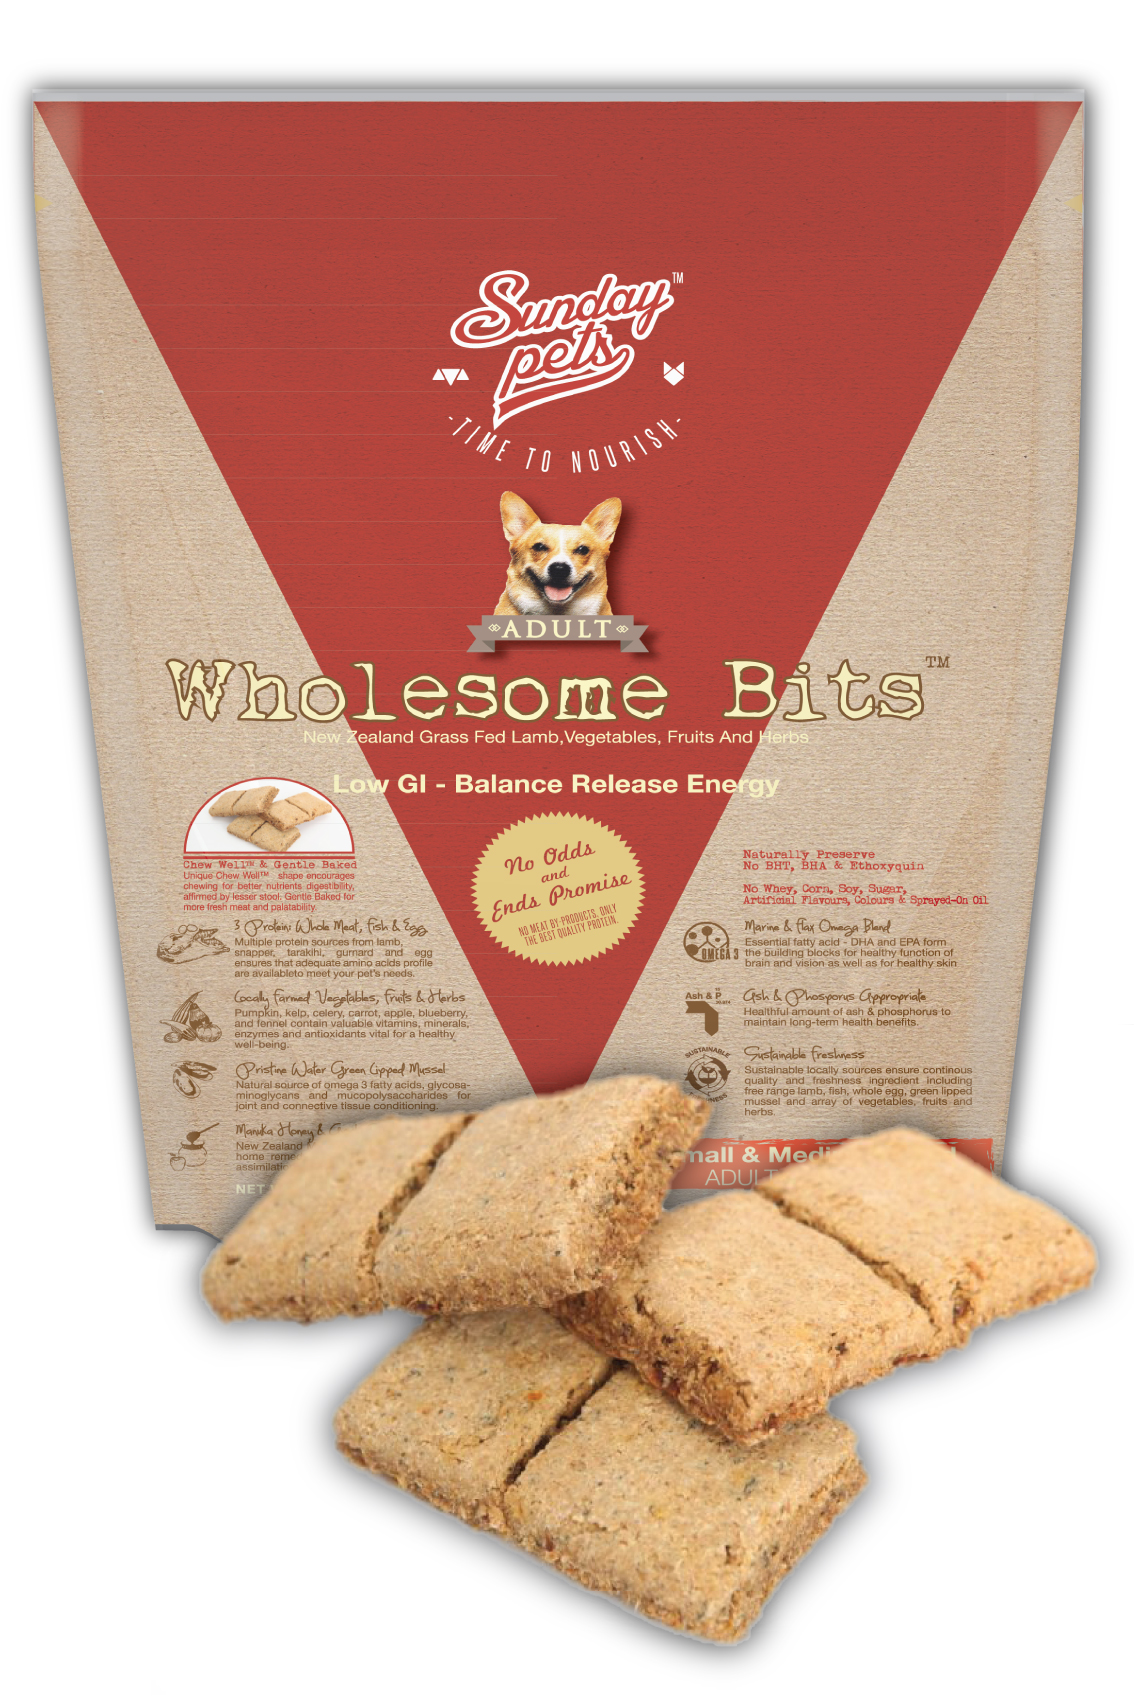 Sunday Pets Wholesome bits Adult 3.3lb